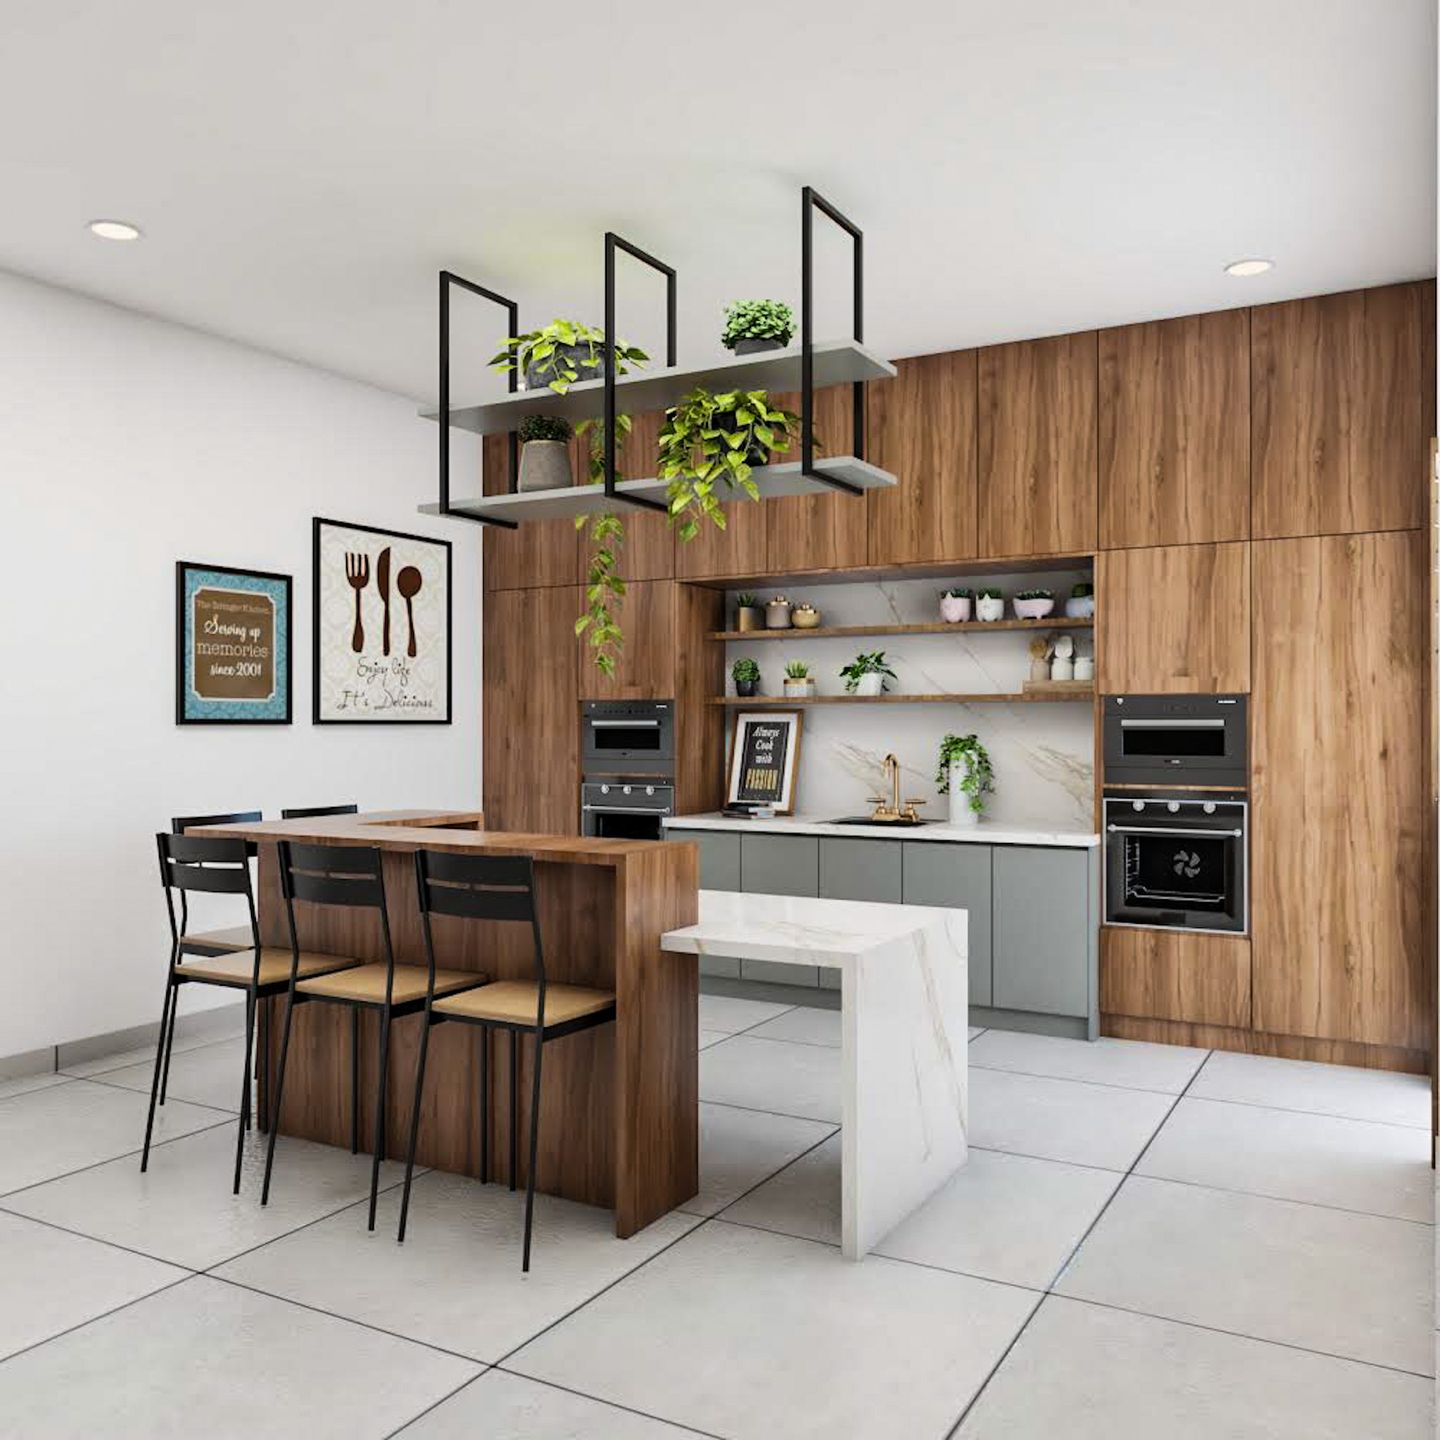 Contemporary Wood Kitchen Design With Breakfast Counter - Livspace